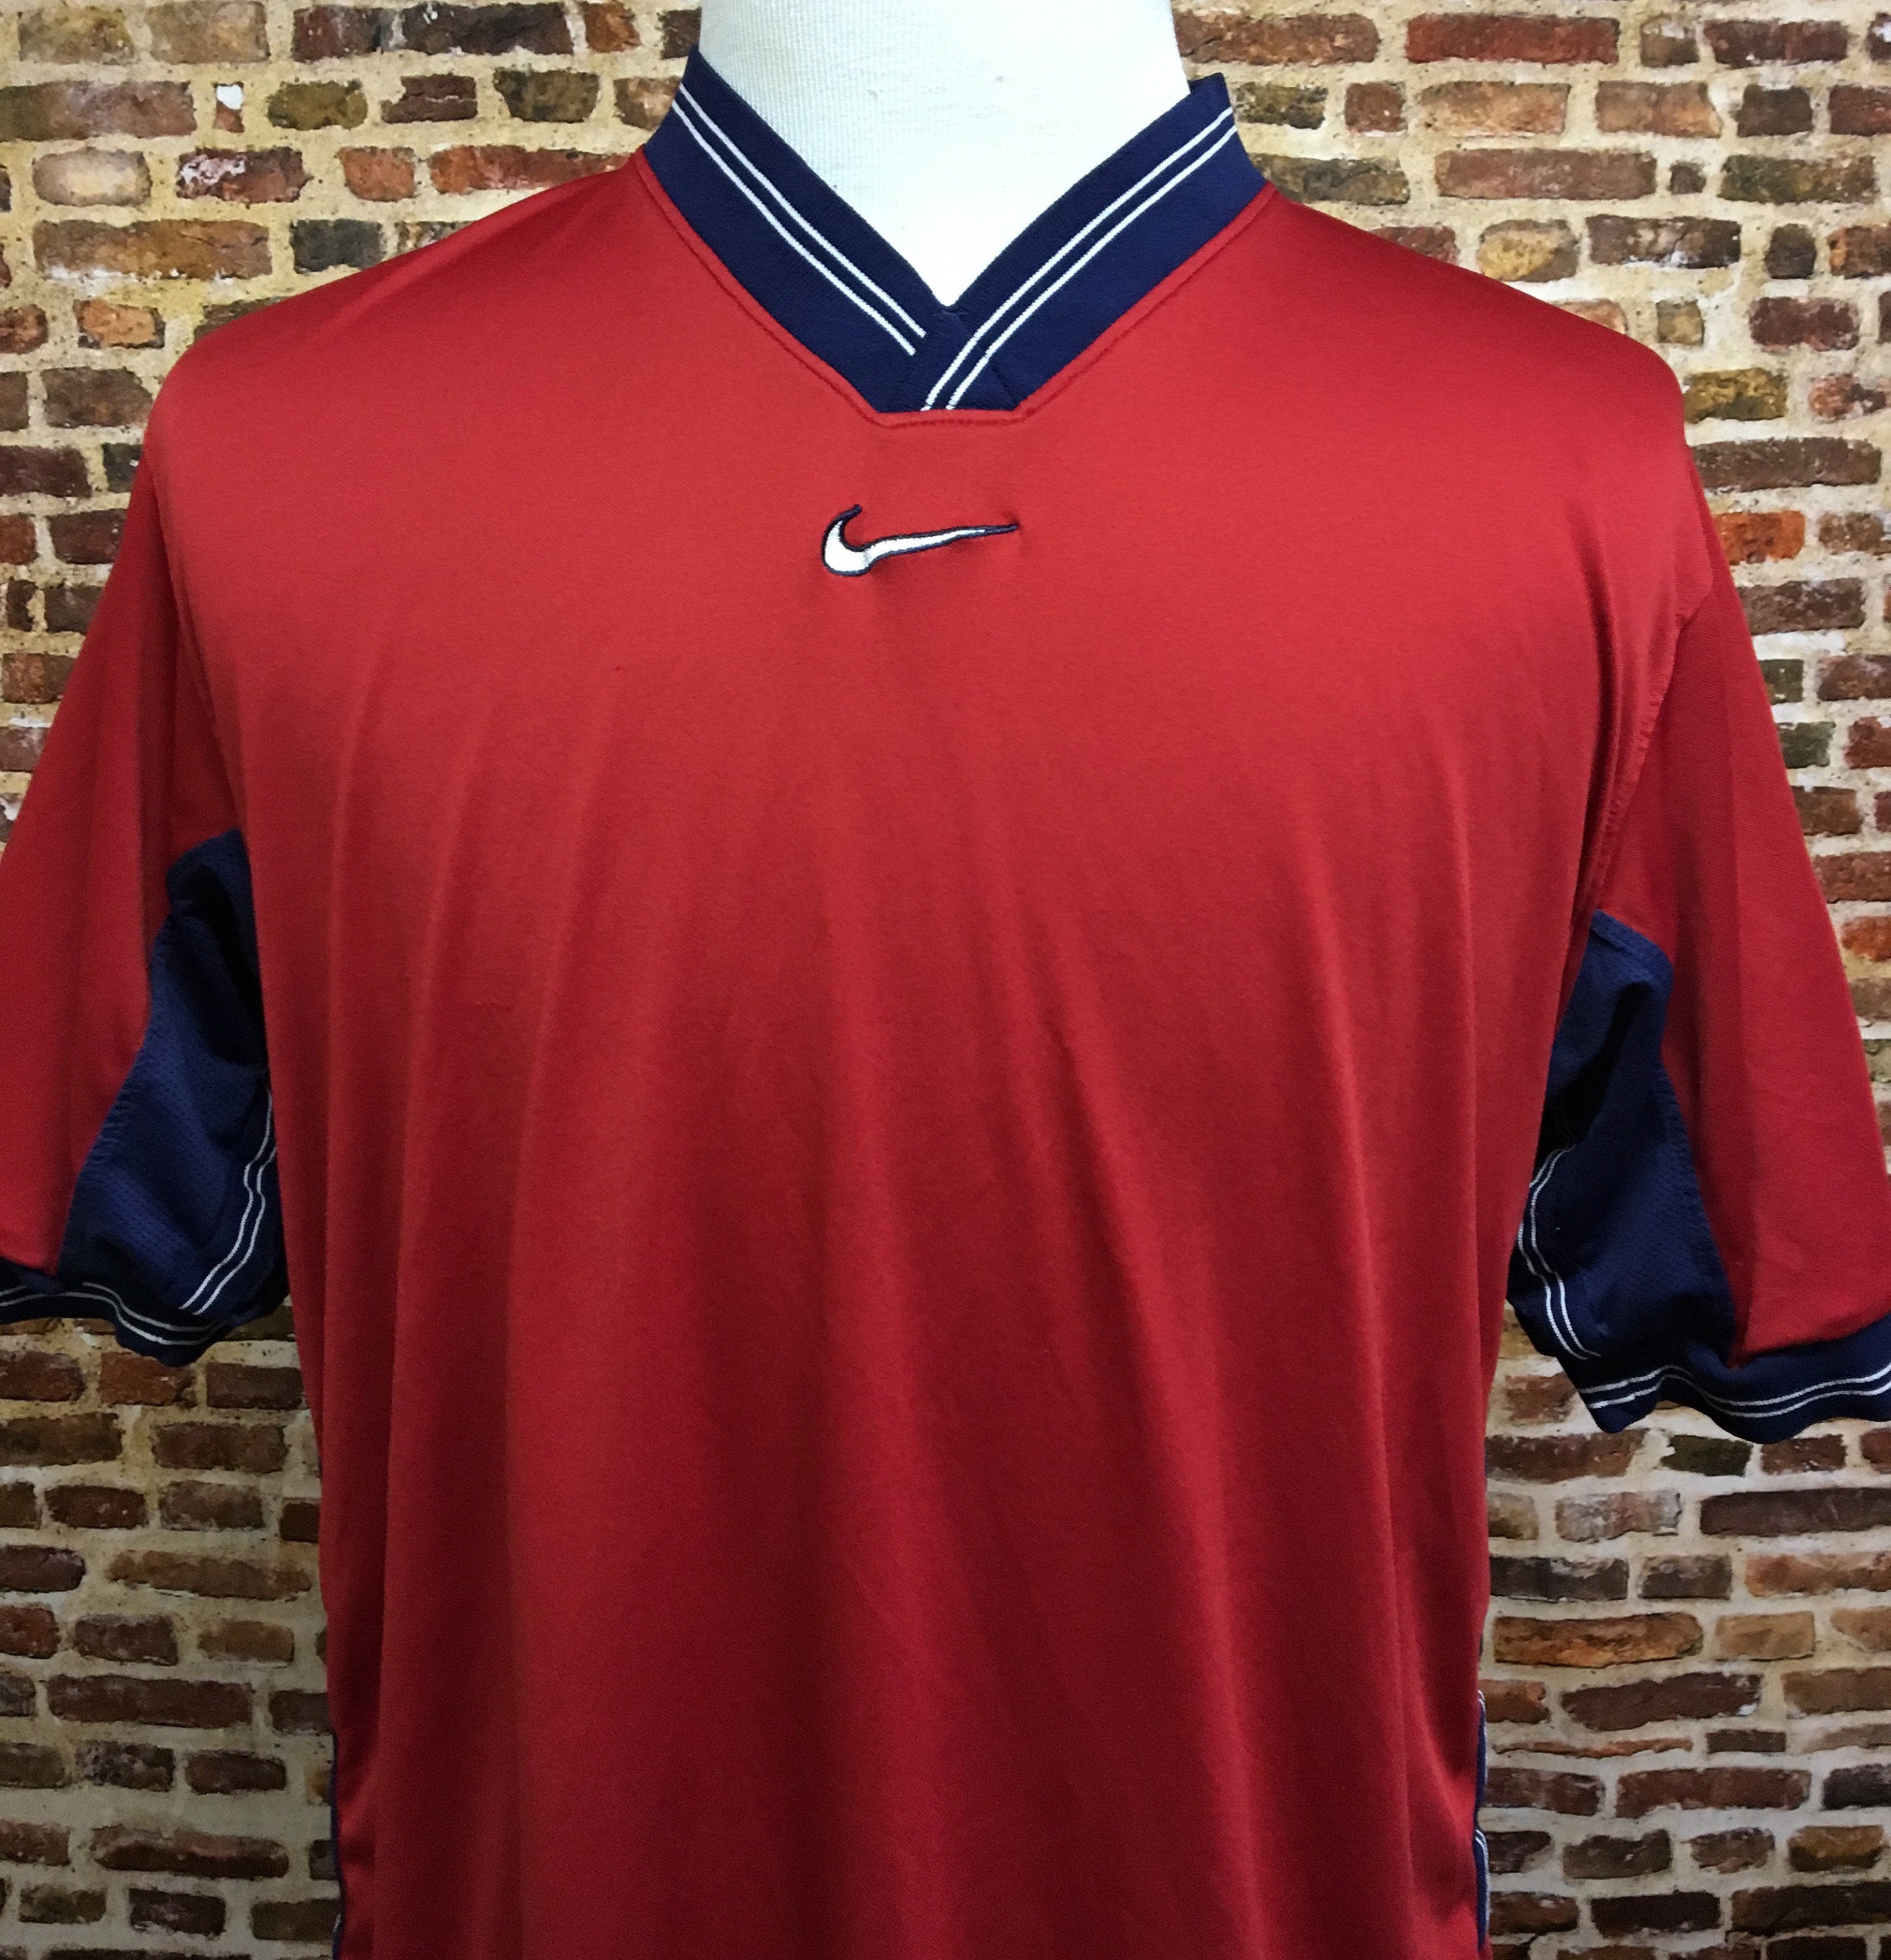 Vintage 90's USA SOCCER Mens XL Jersey made by Nike | Etsy